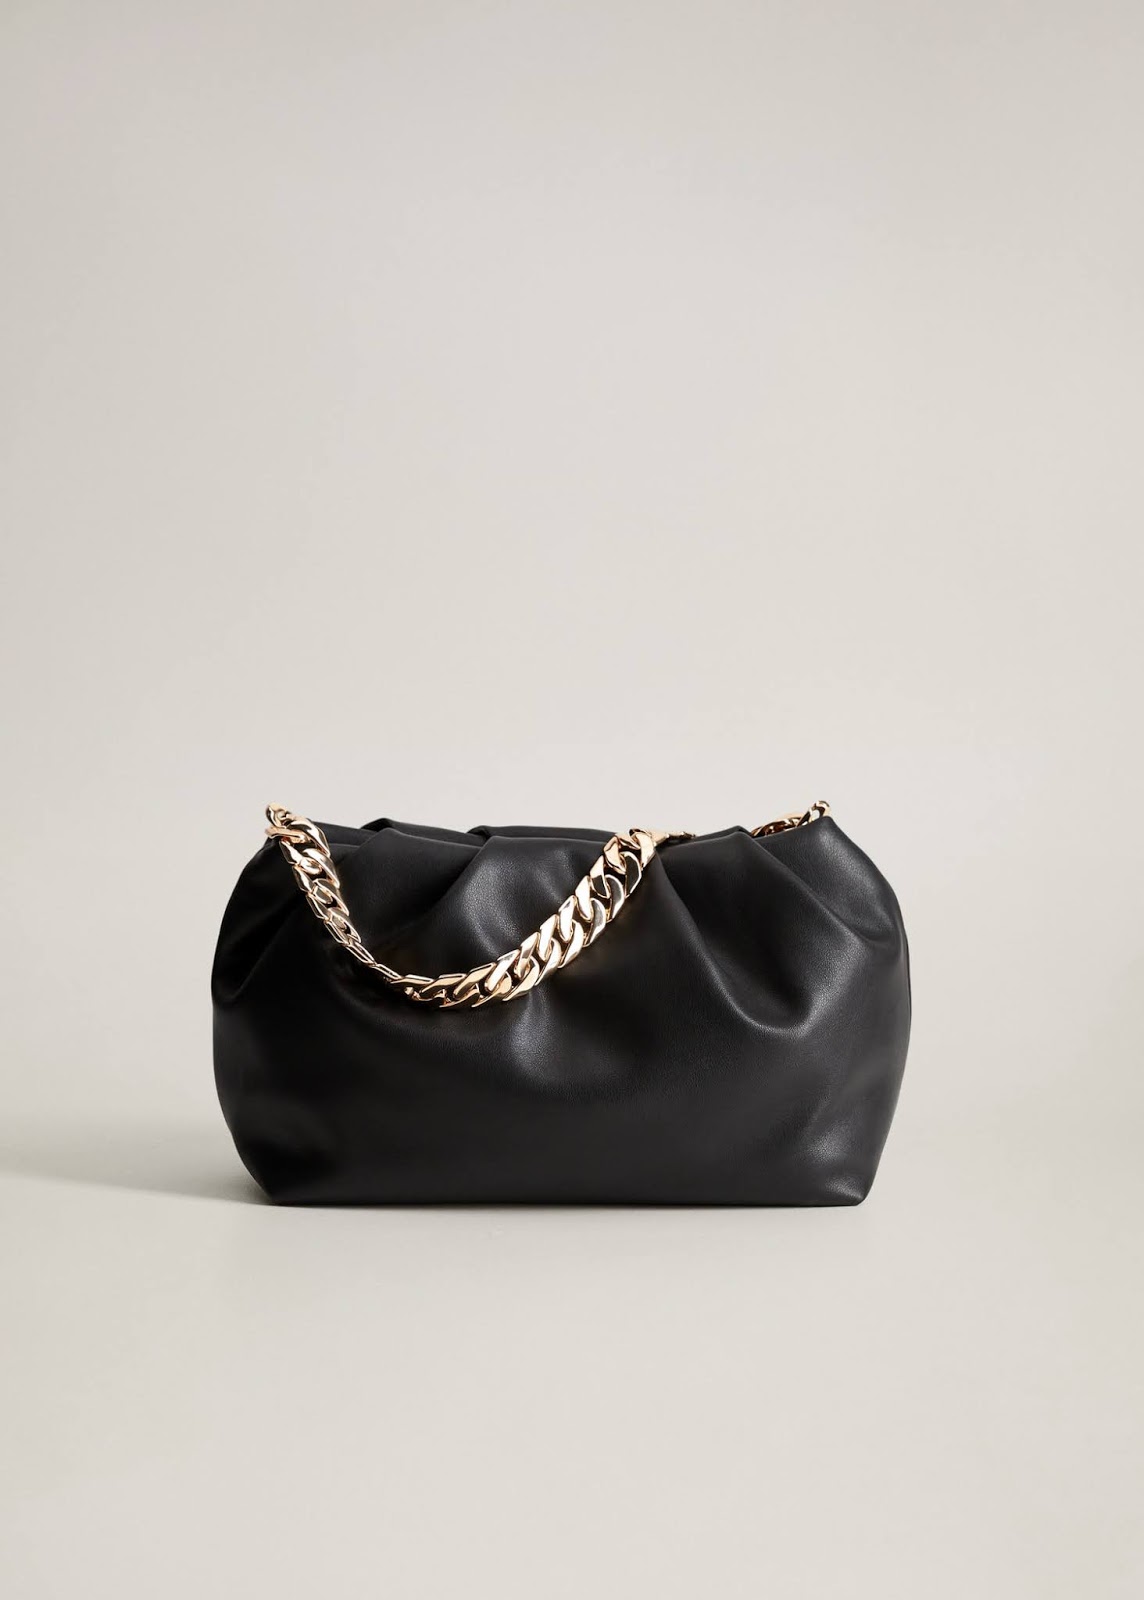 Affordable Dupes Of S It Handbags And Shoes Cherries In The Snow